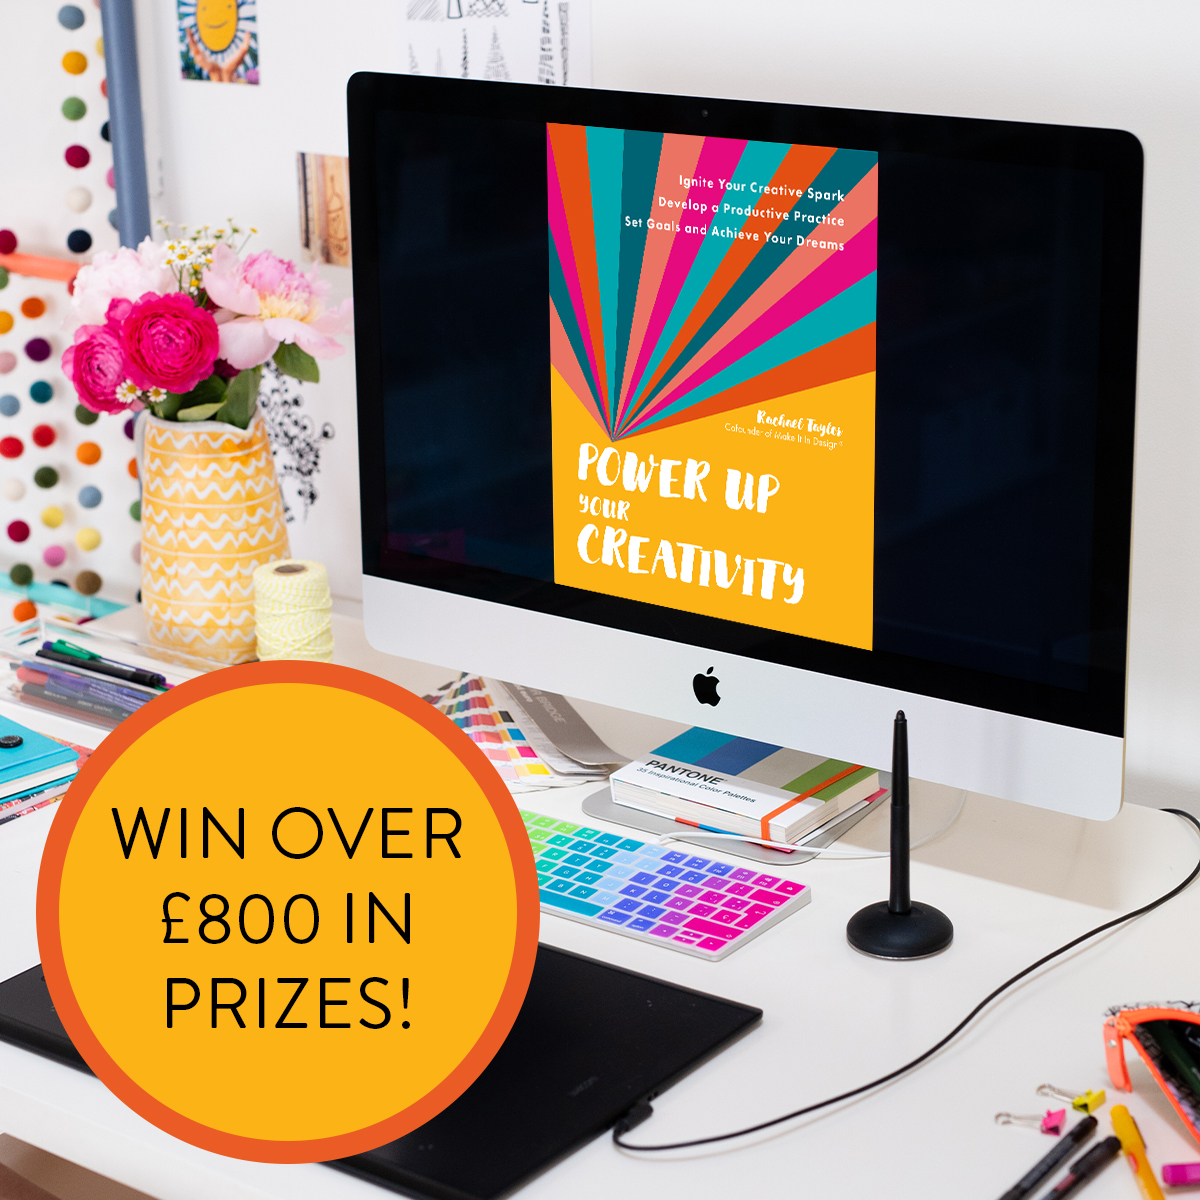 Re-design my book cover & win £800 of prizes!